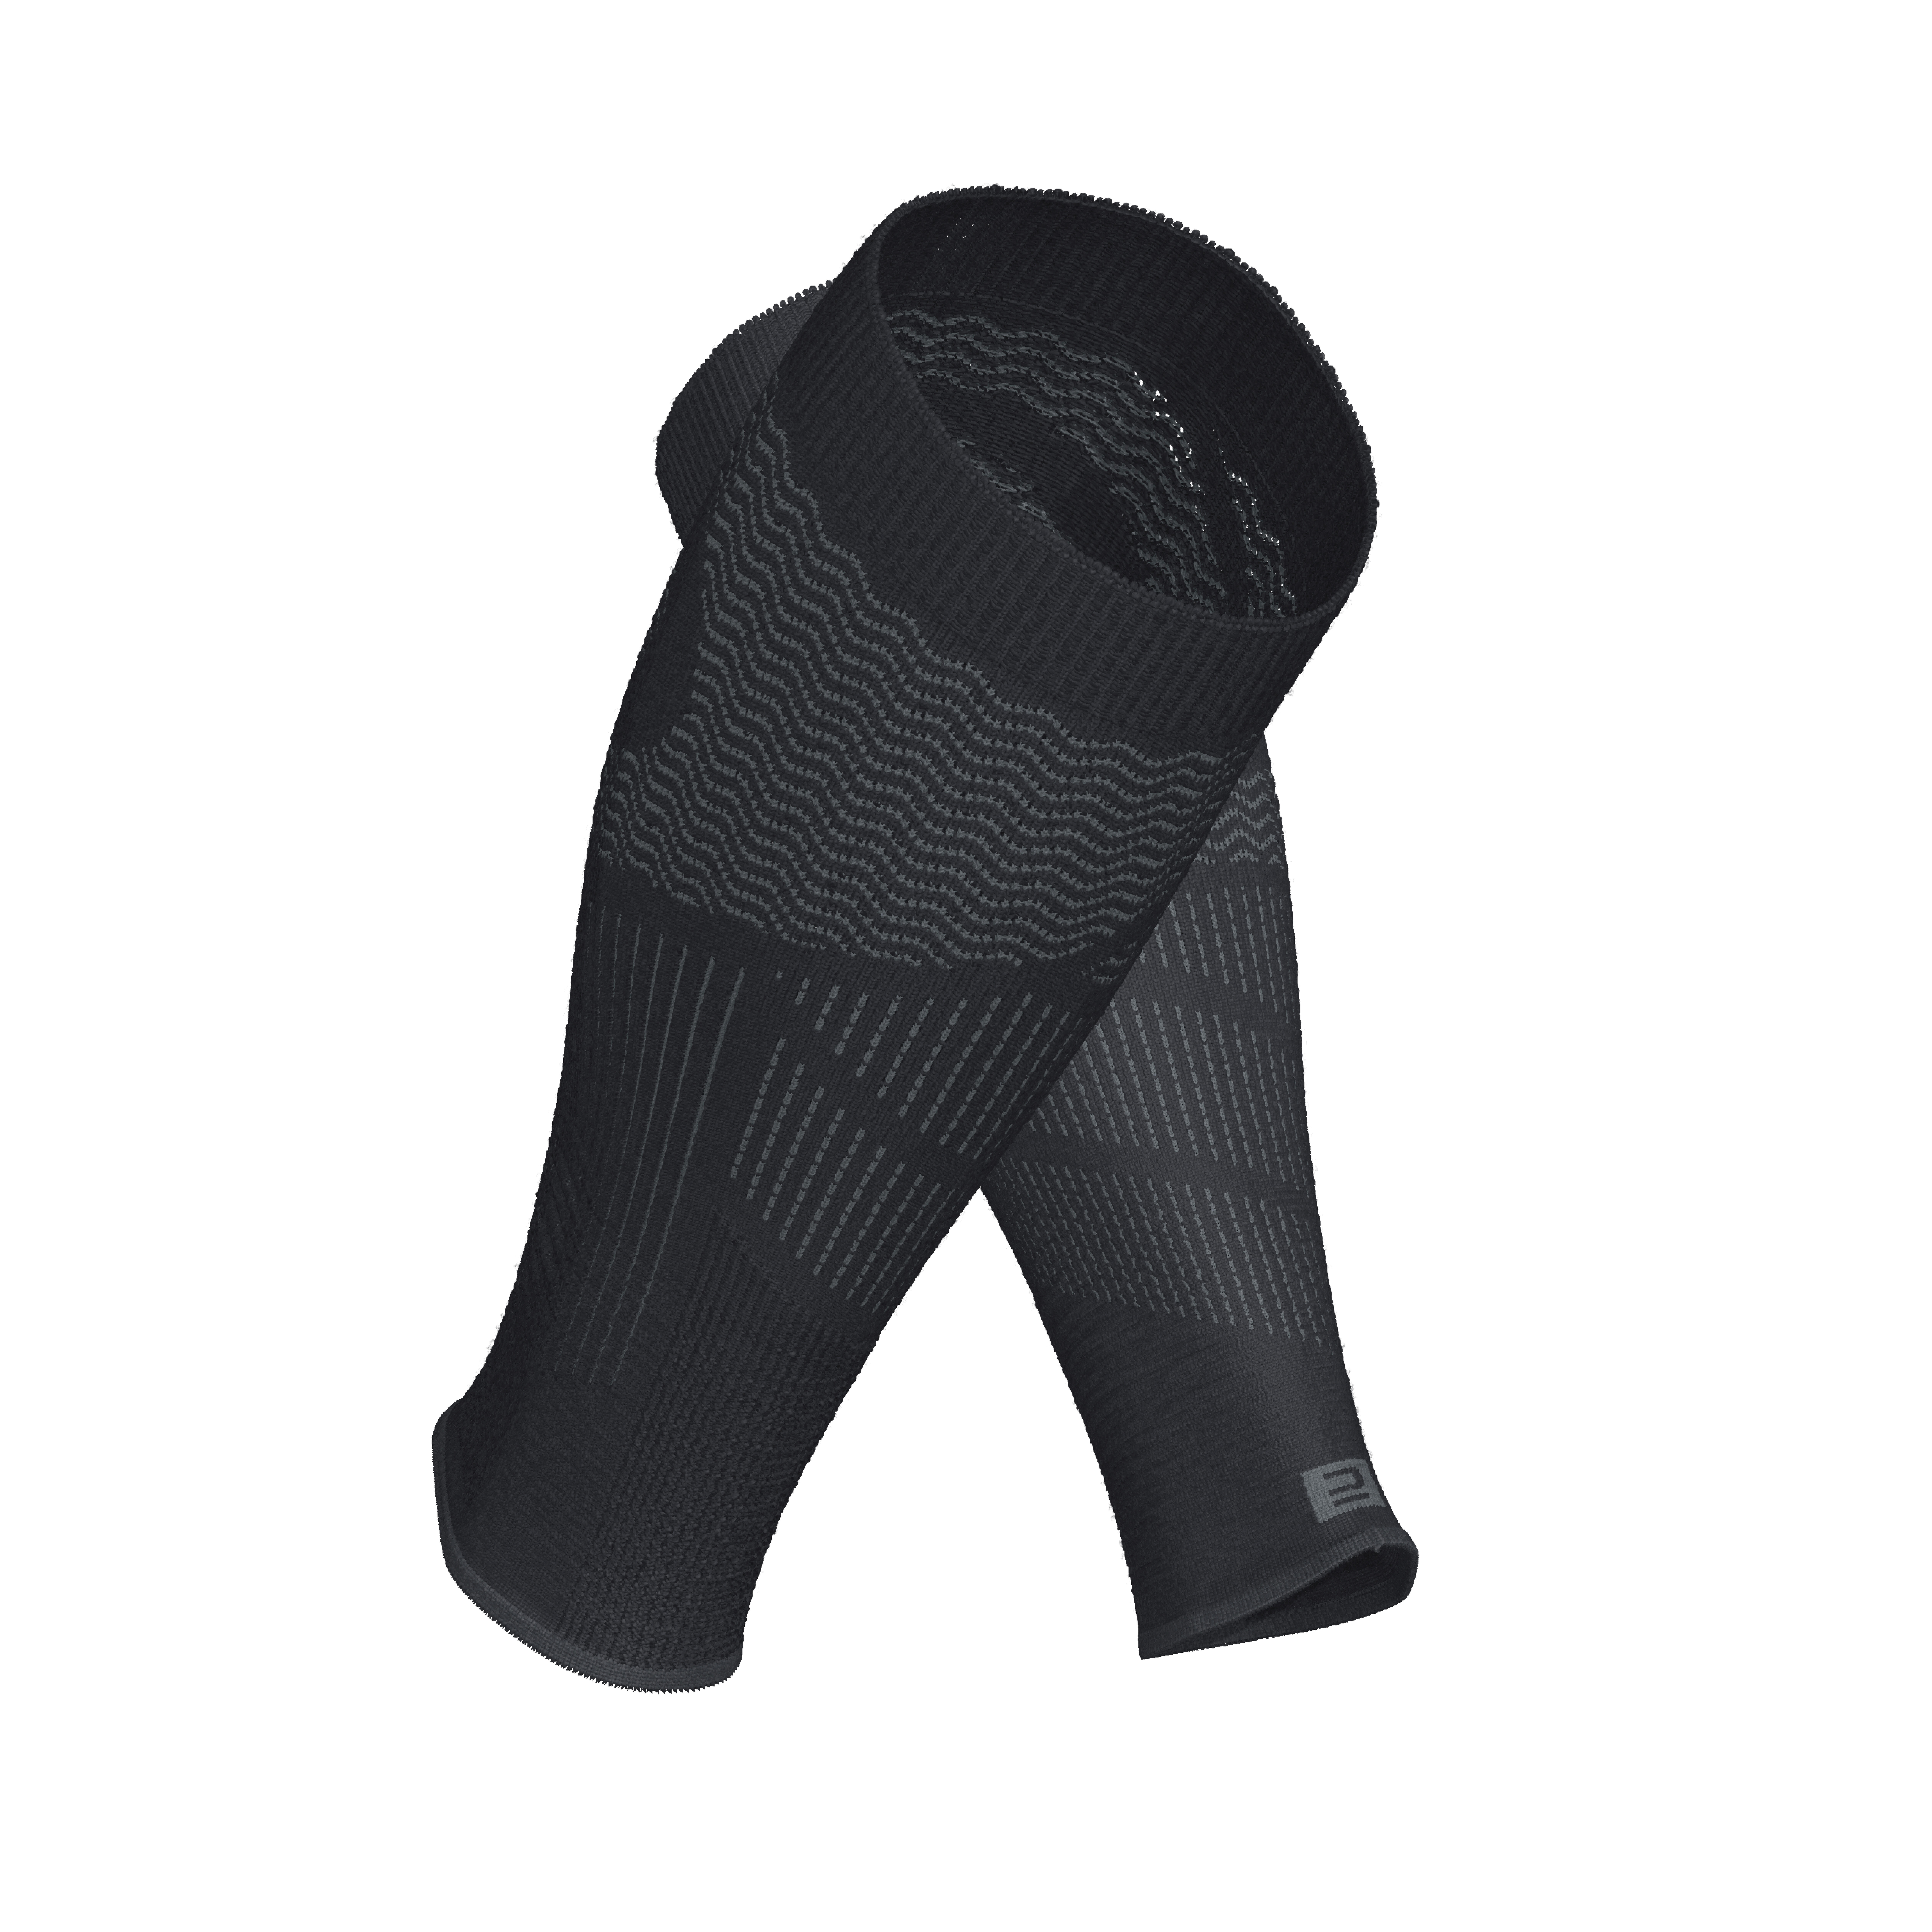 Image of Running Compression Sleeves - Run 900